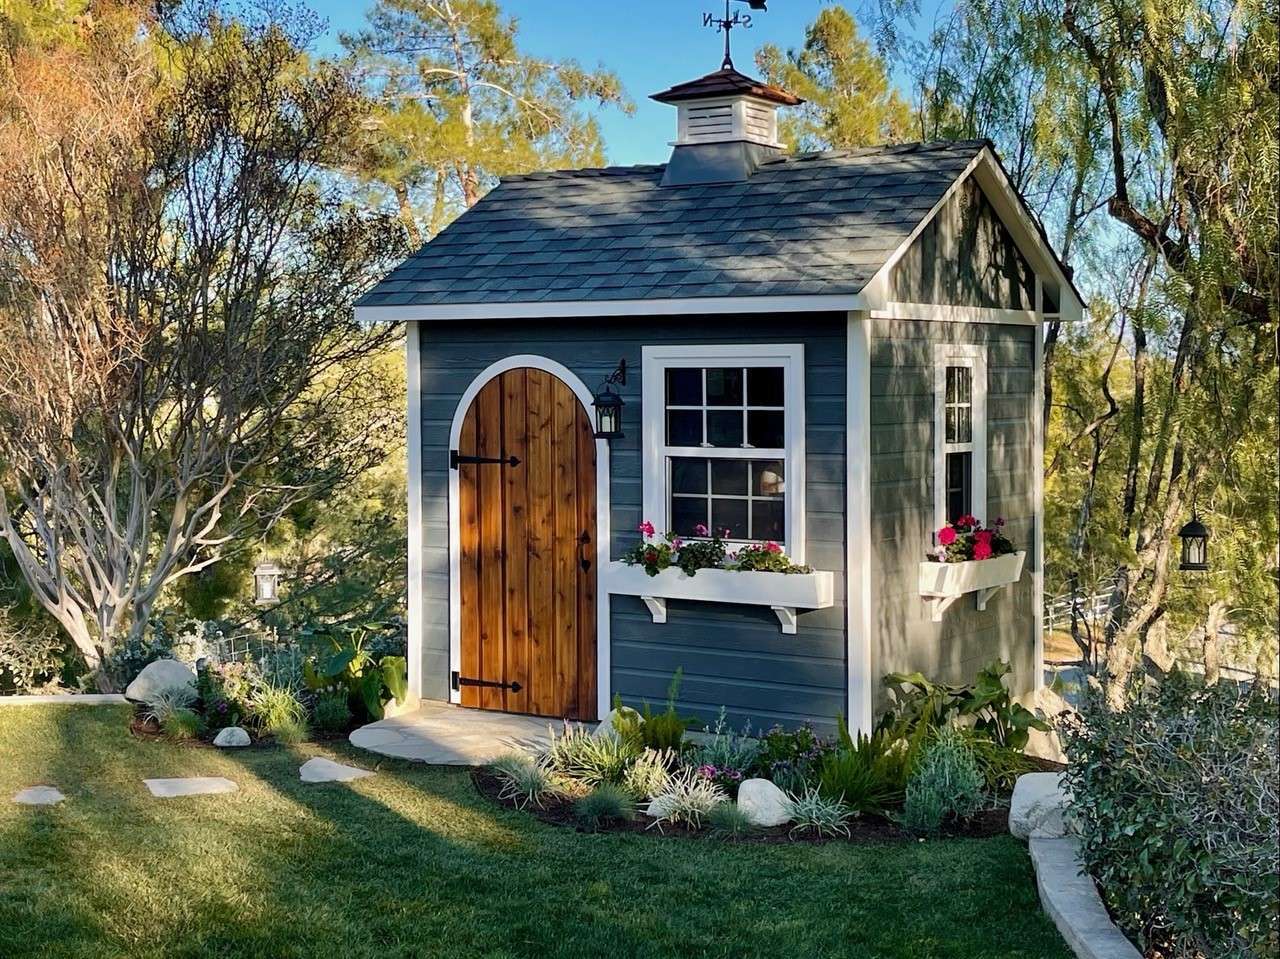 Front view of 7' x 9' Palmerston Garden Shed located in Castiac, California - Summerwood Products